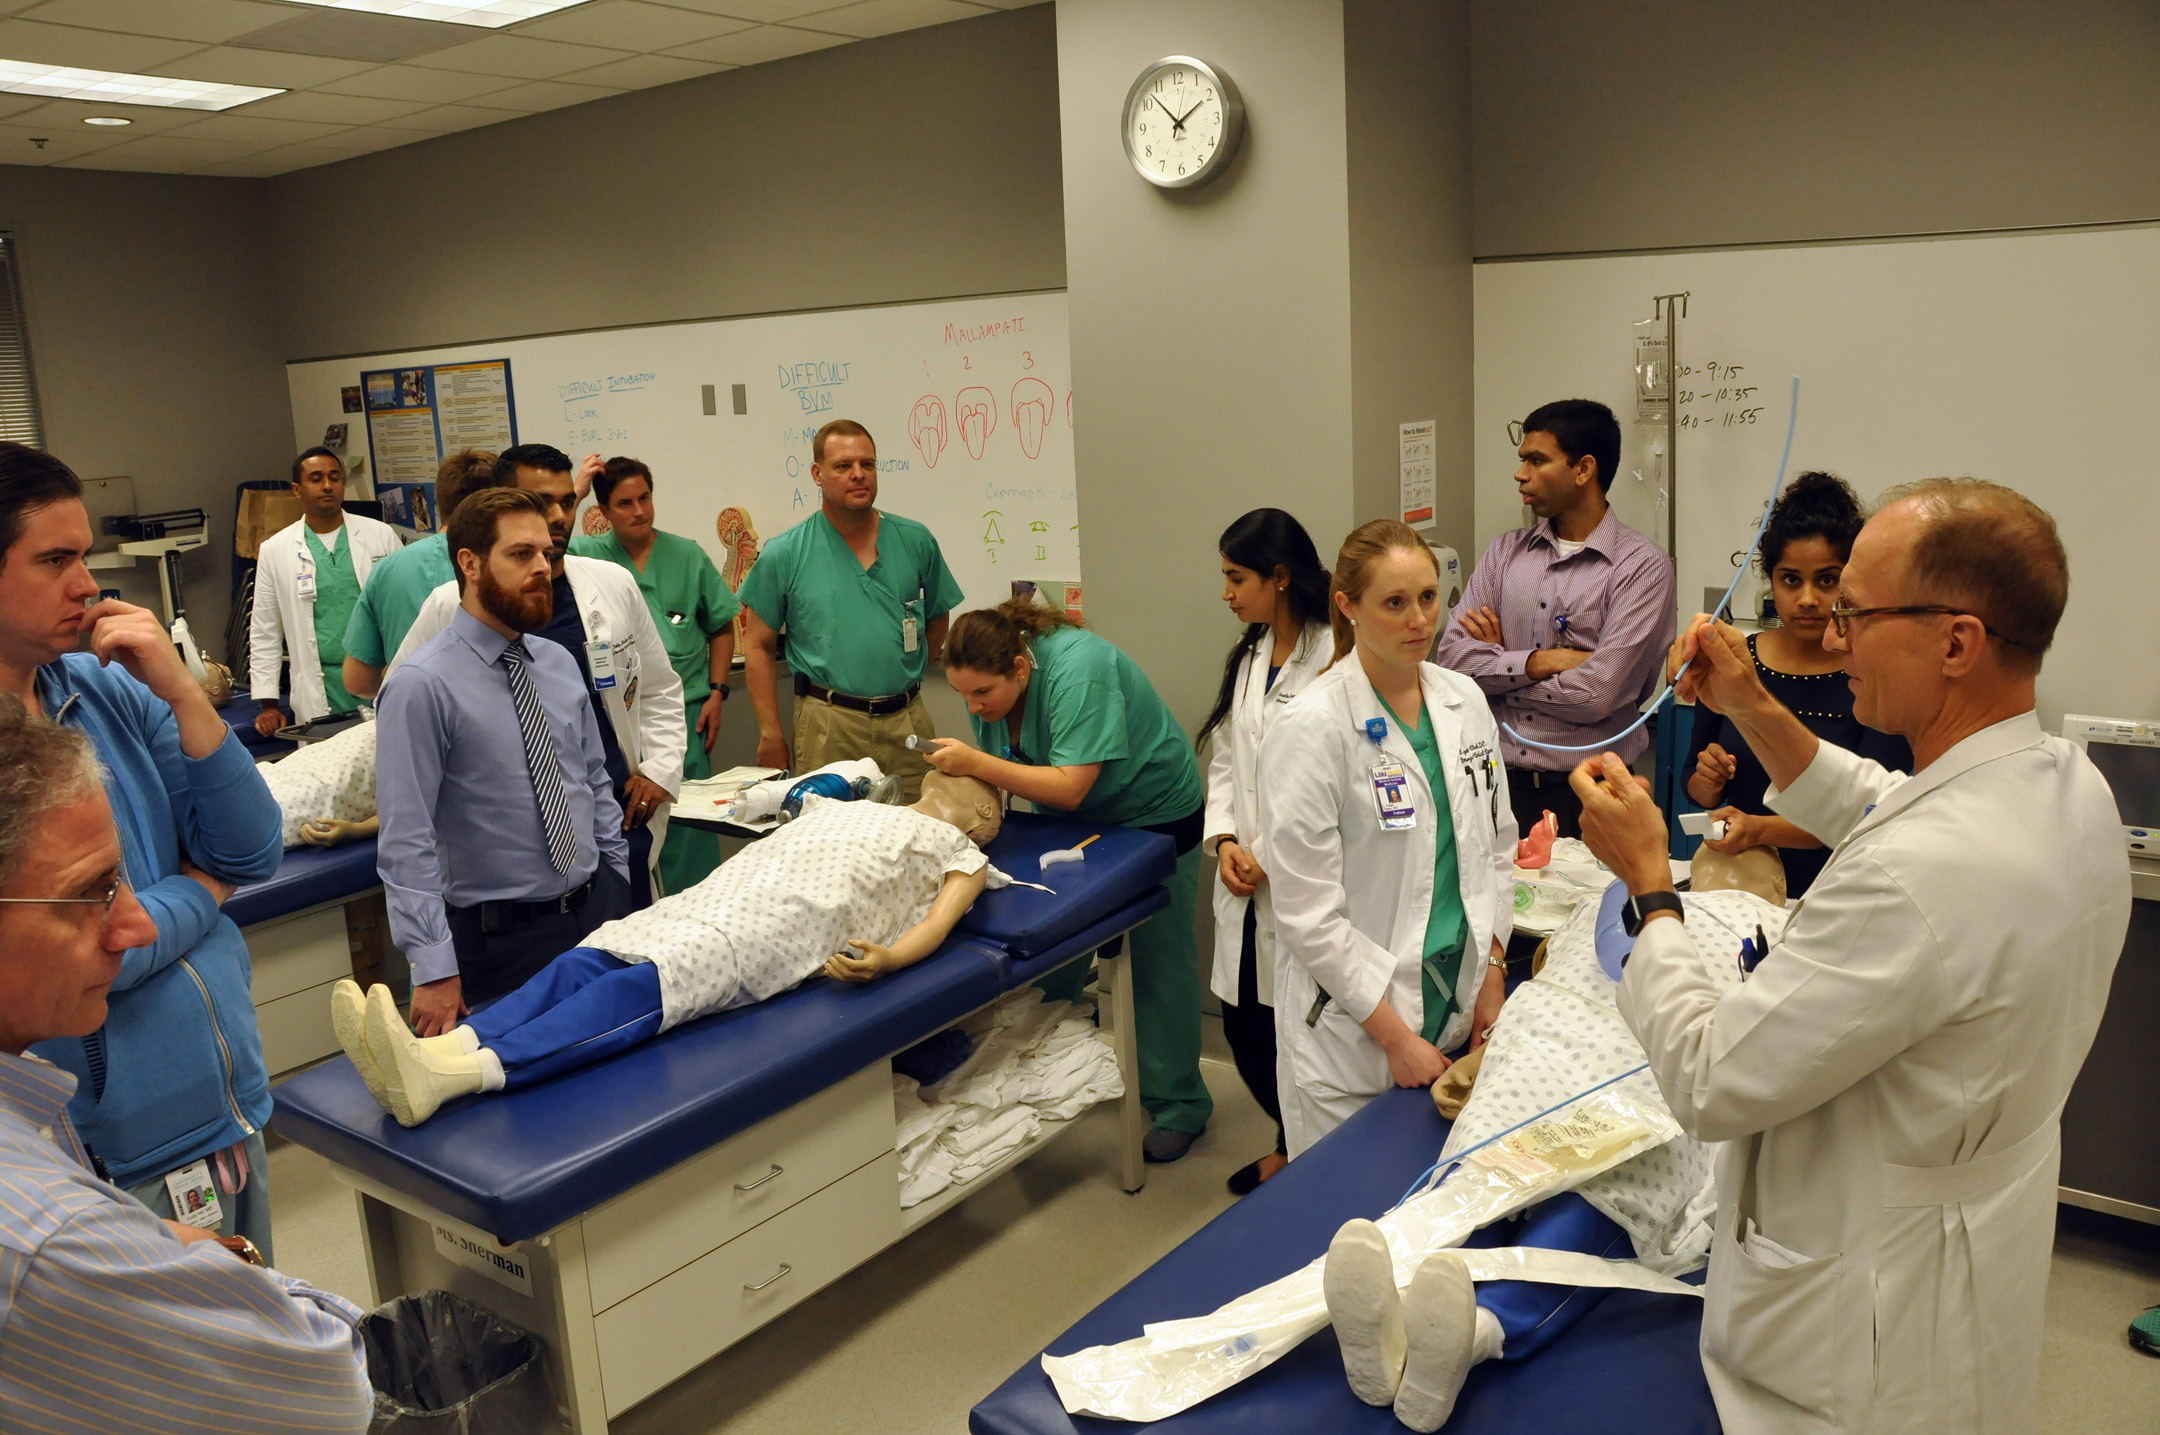 Pulmonary Critical Care Video Airway Management Training